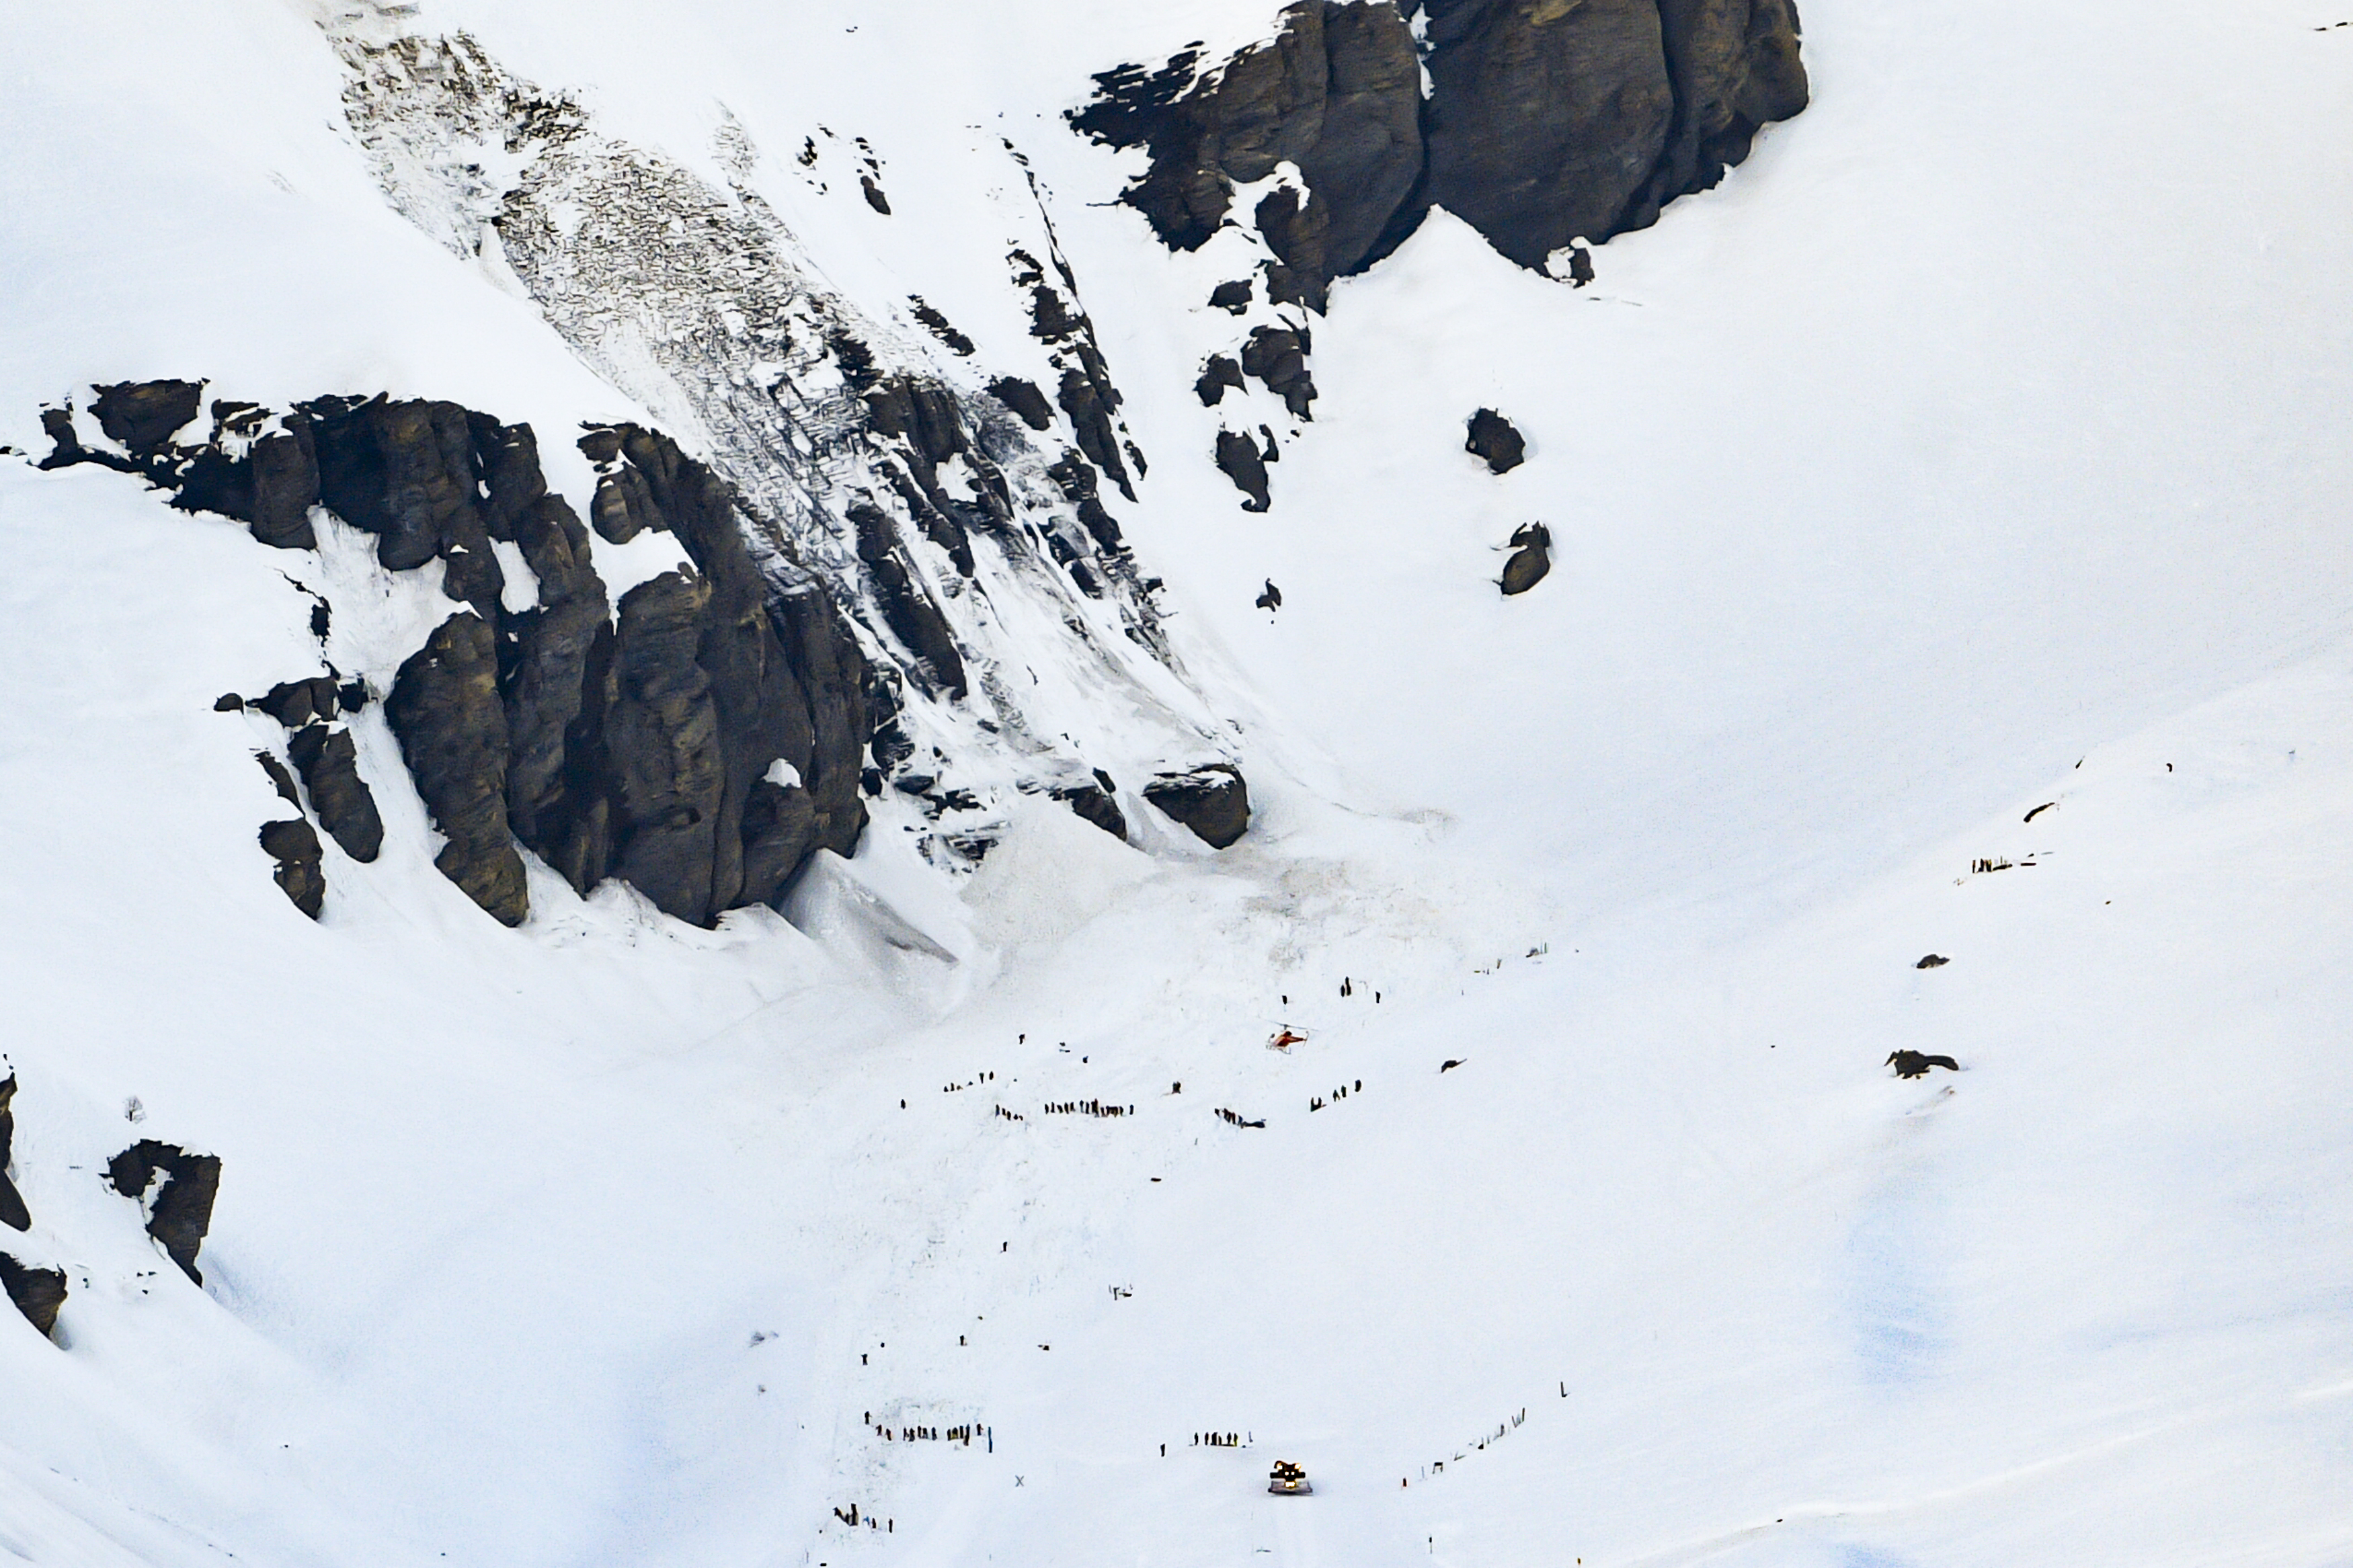 Rescue crews work on the avalanche site at the ski resort of Crans-Montana